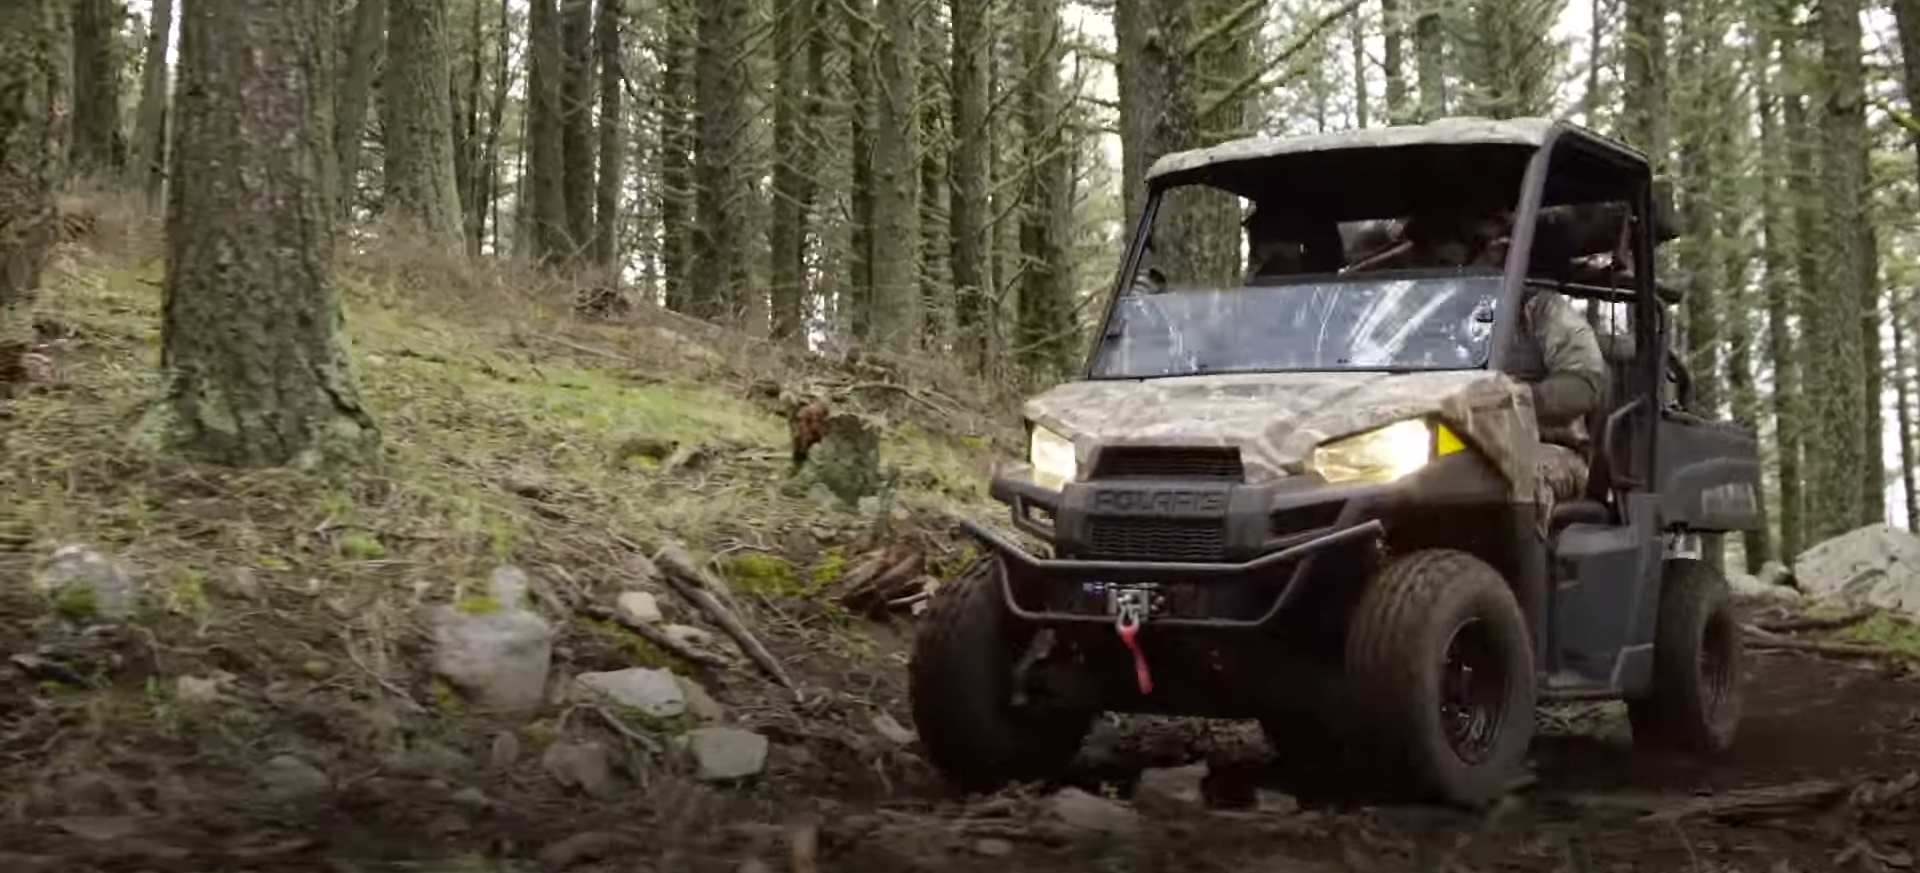 Polaris unveiled the RANGER EV LiIon first new EV resulting from